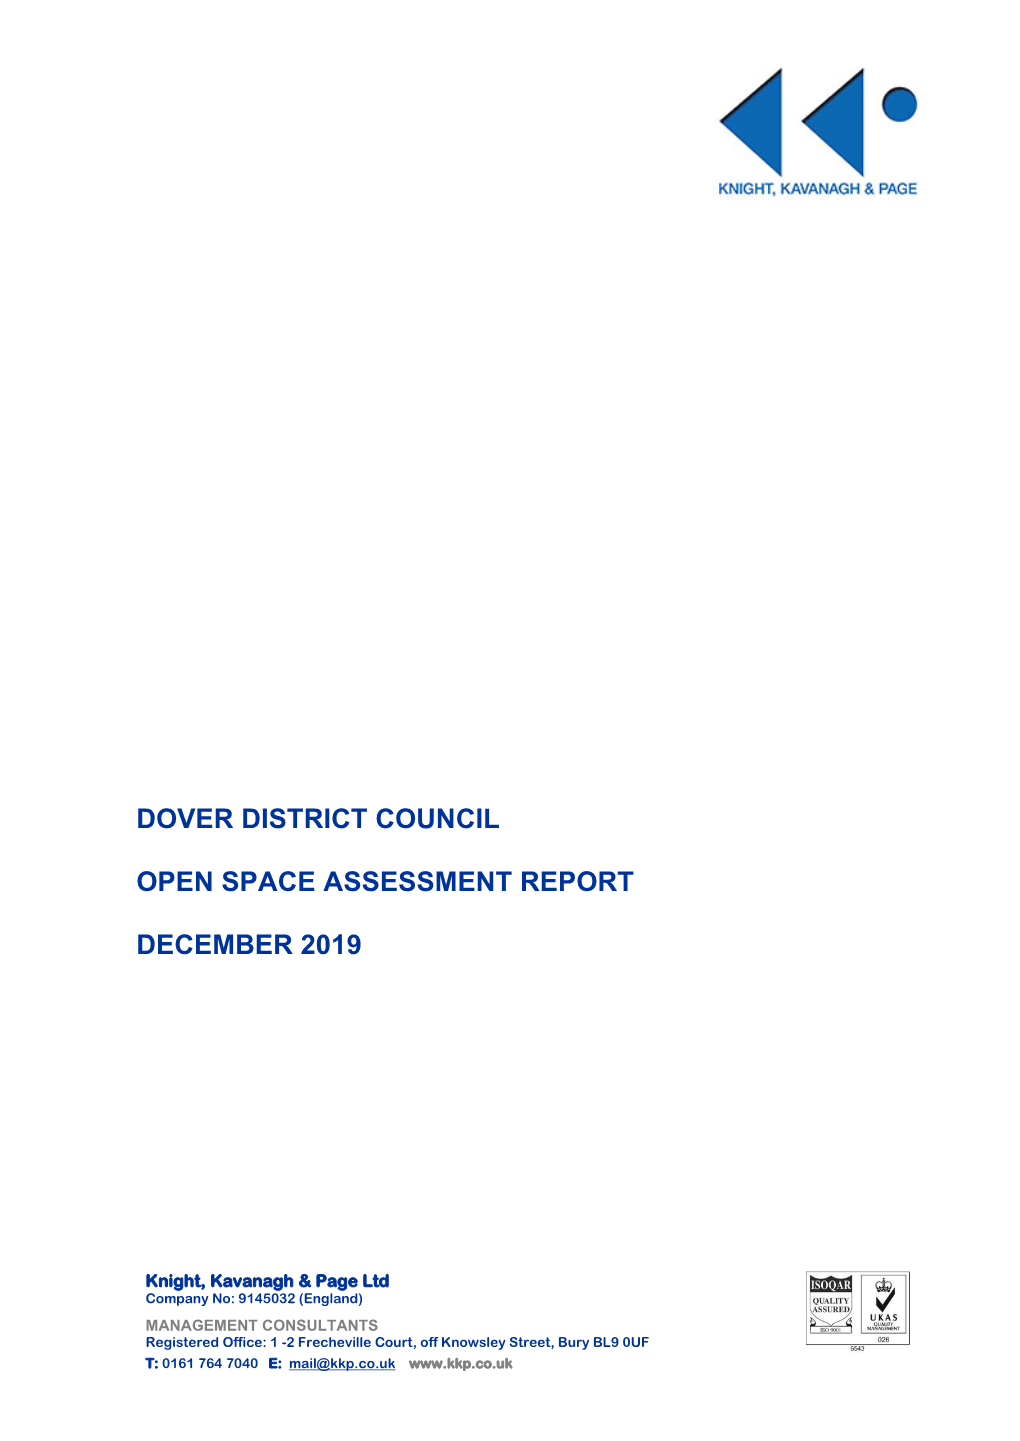 Open Space Assessment Report